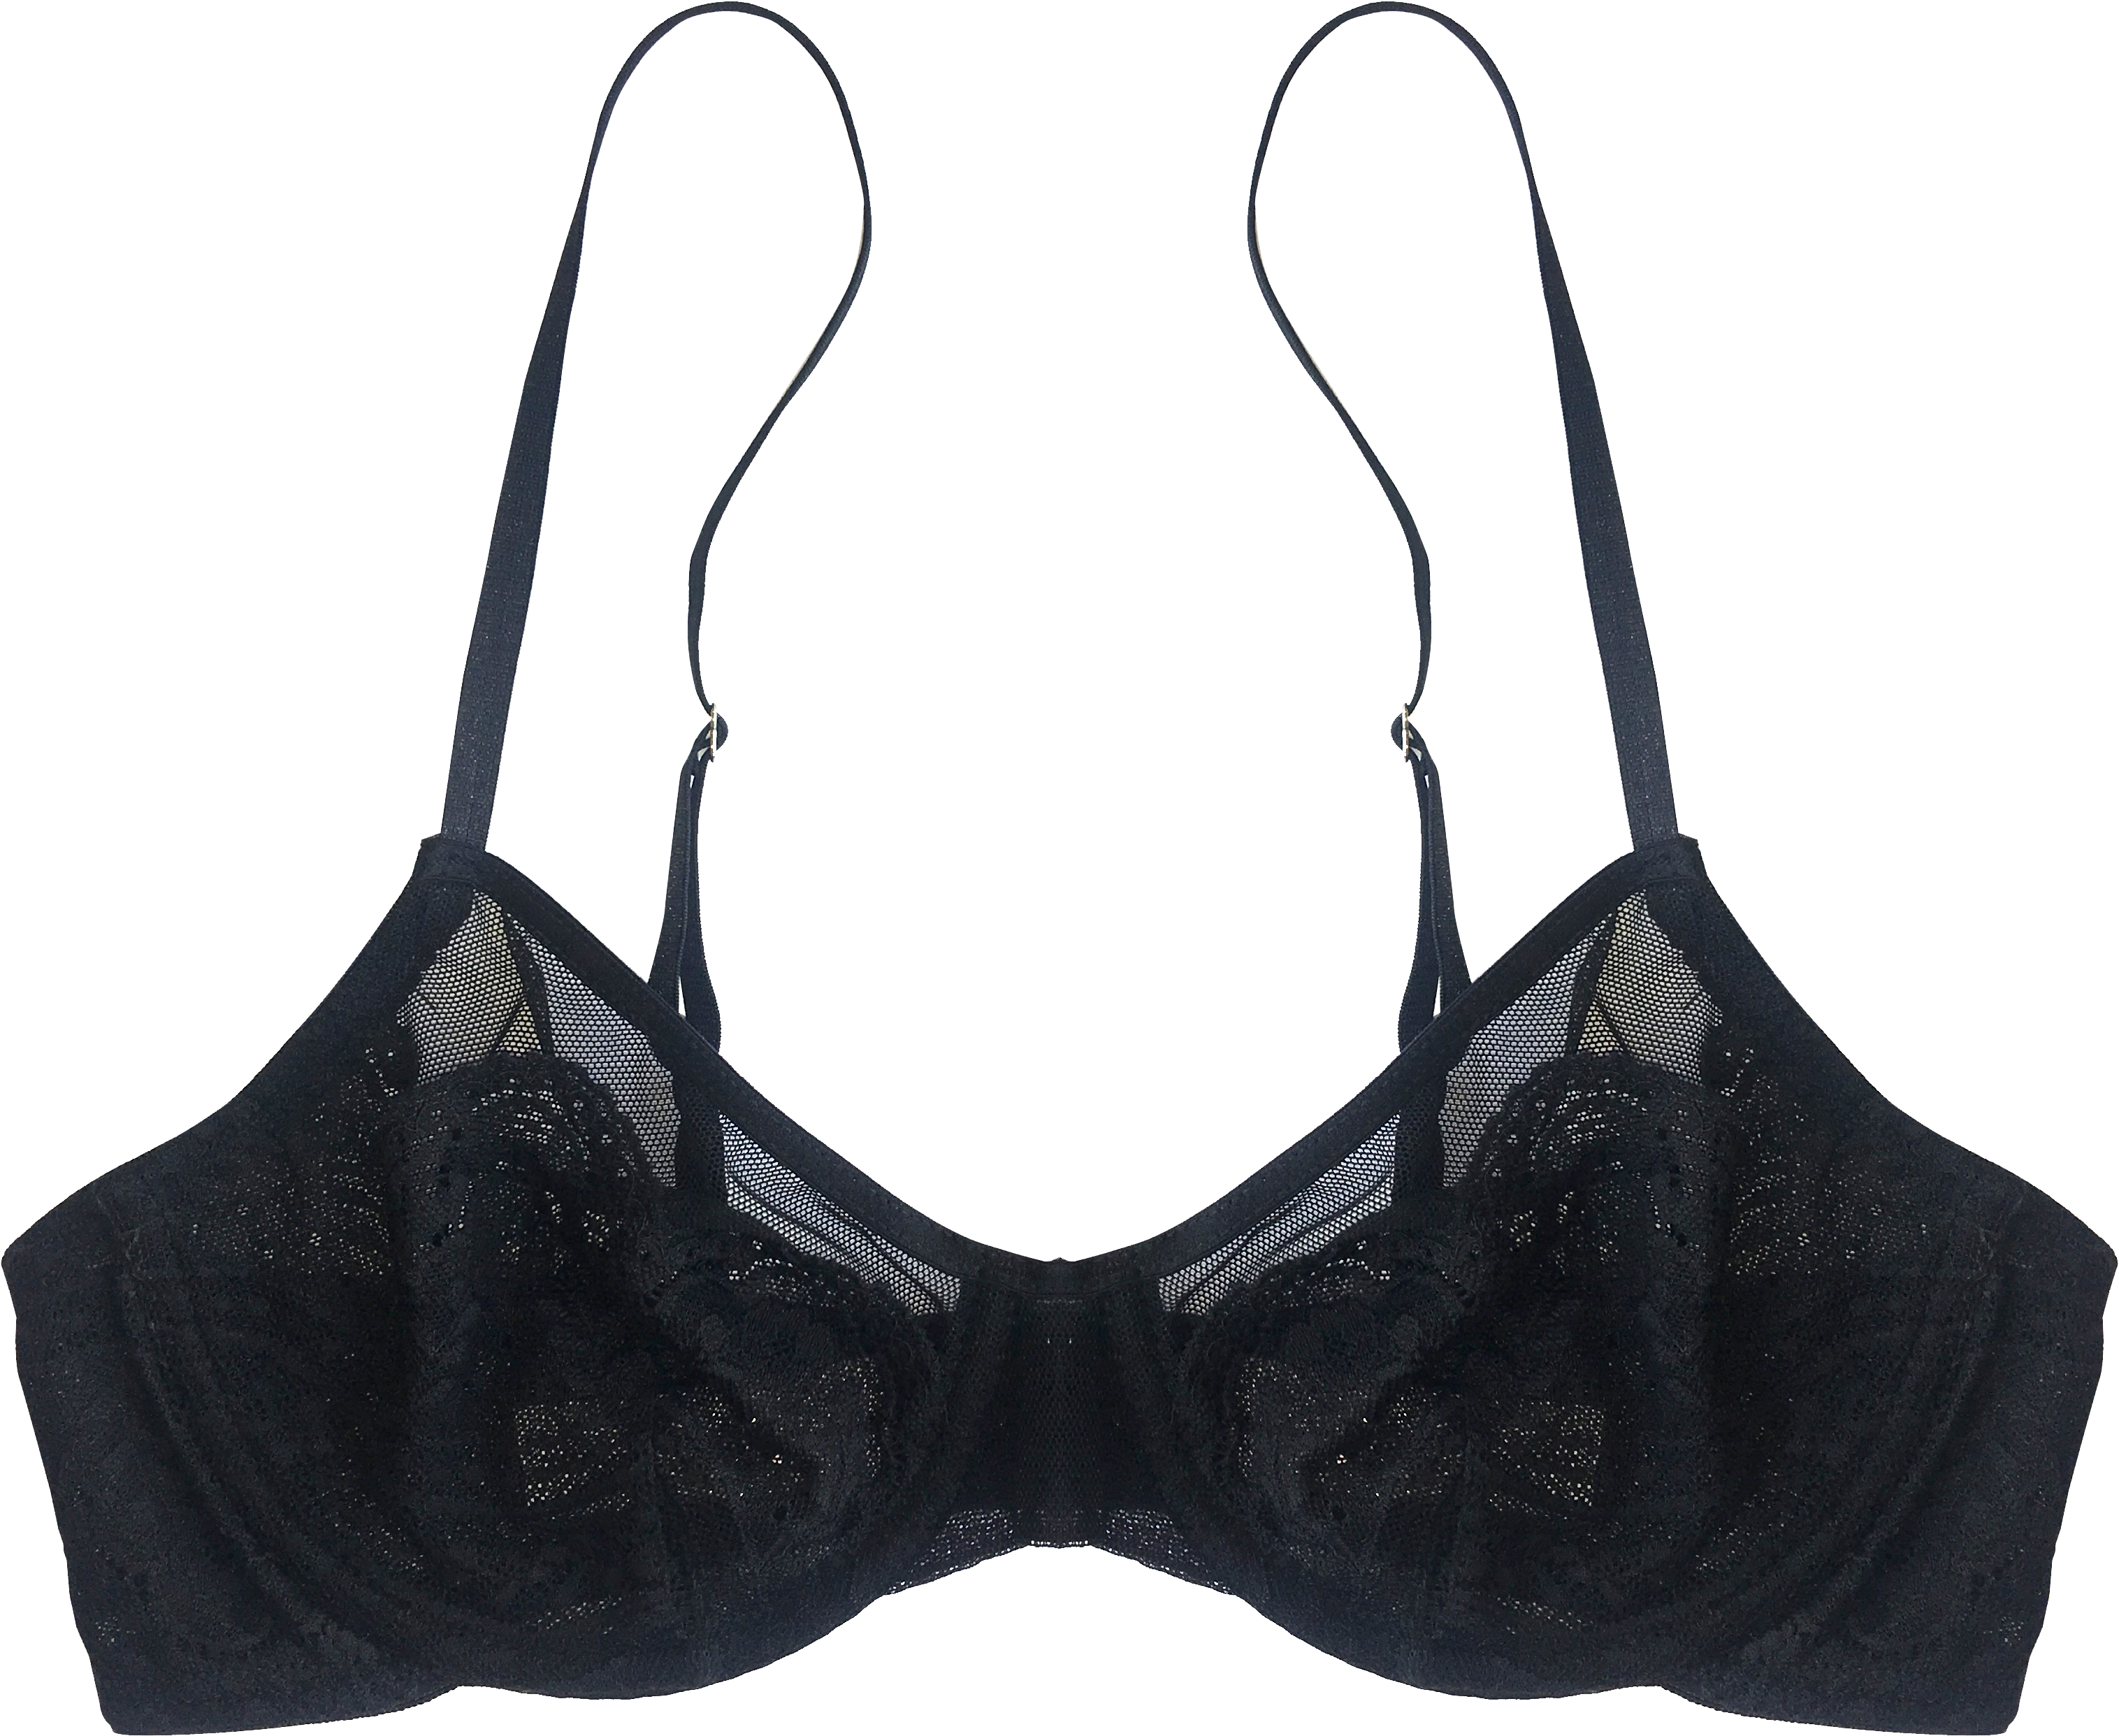 Black Lace Bra Product Image PNG